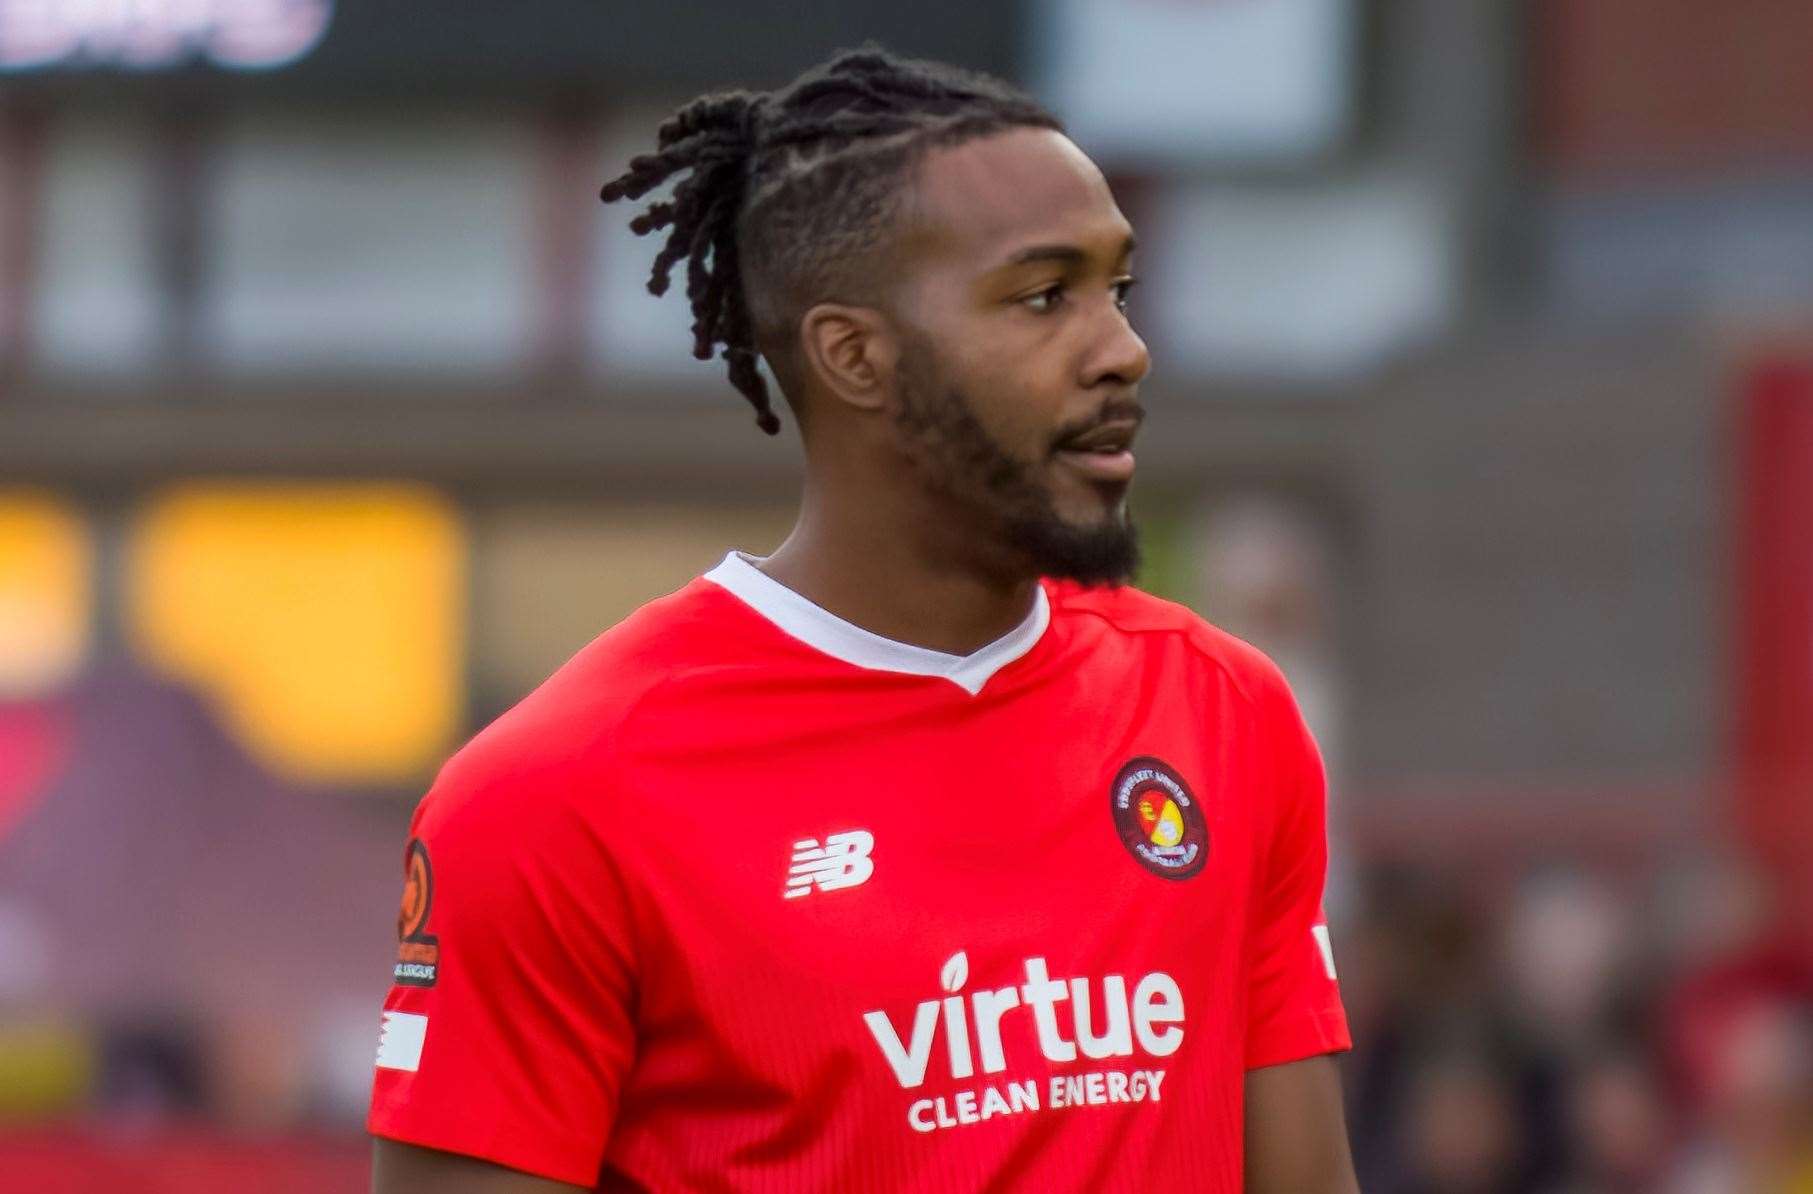 Ebbsfleet United striker Dominic Poleon happy to have the pressure of  scoring goals after netting twice in 3-2 National League defeat to Bromley